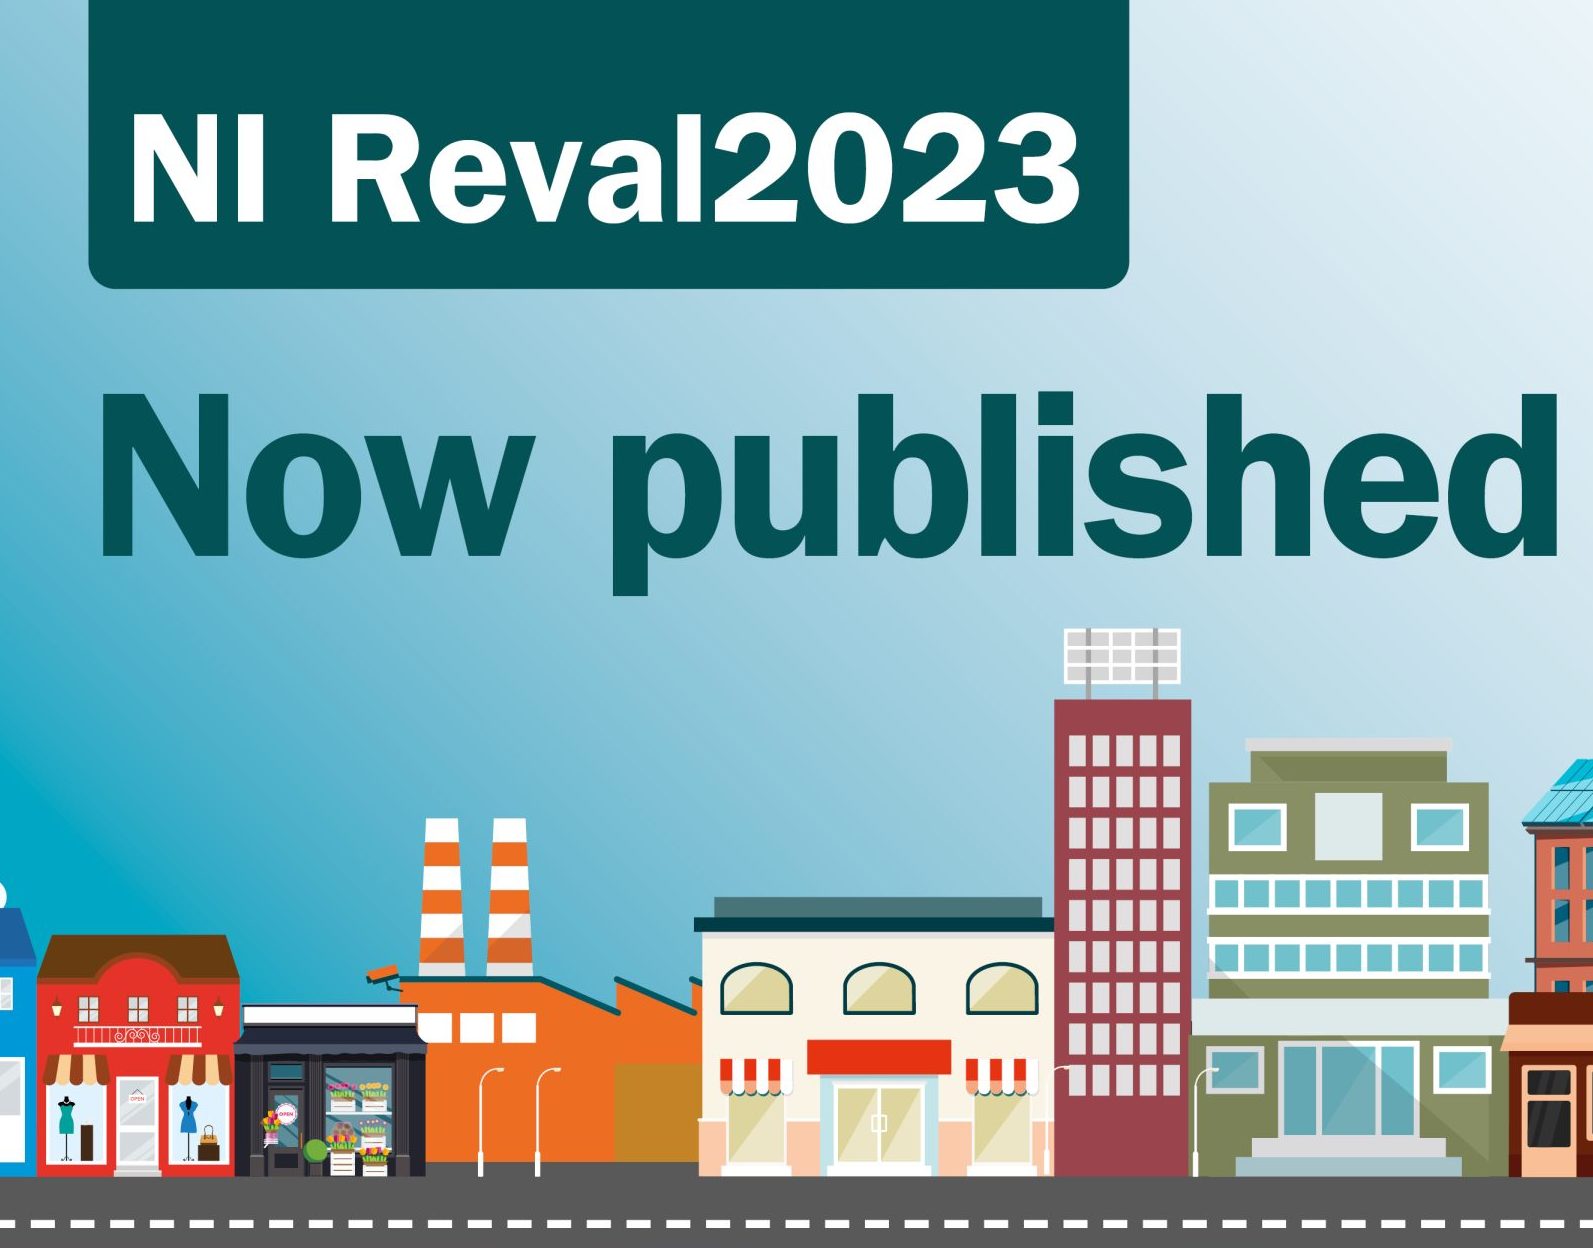 ReVal2023 - your questions answered